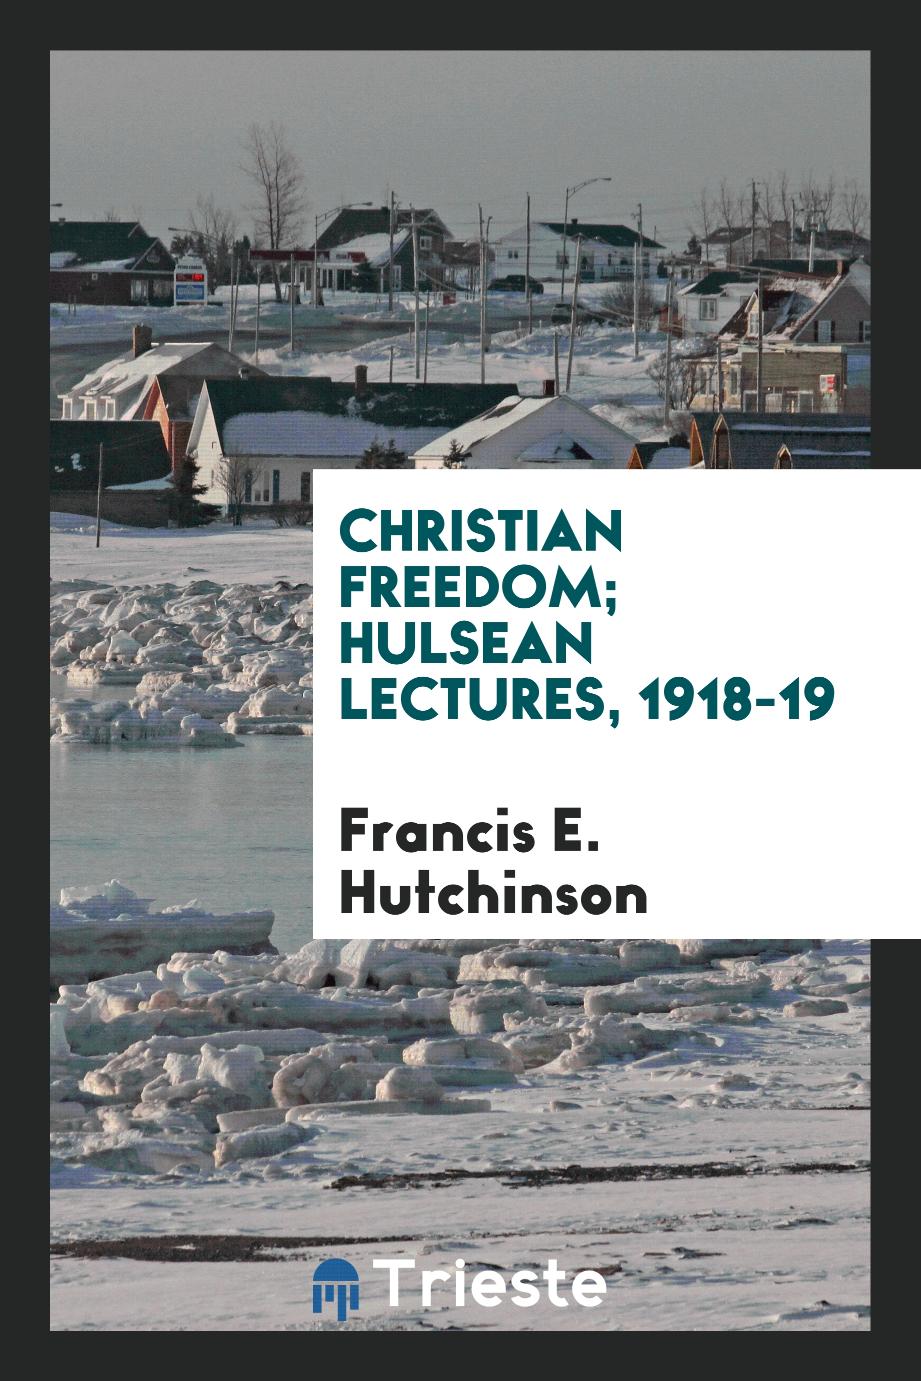 Christian freedom; Hulsean lectures, 1918-19